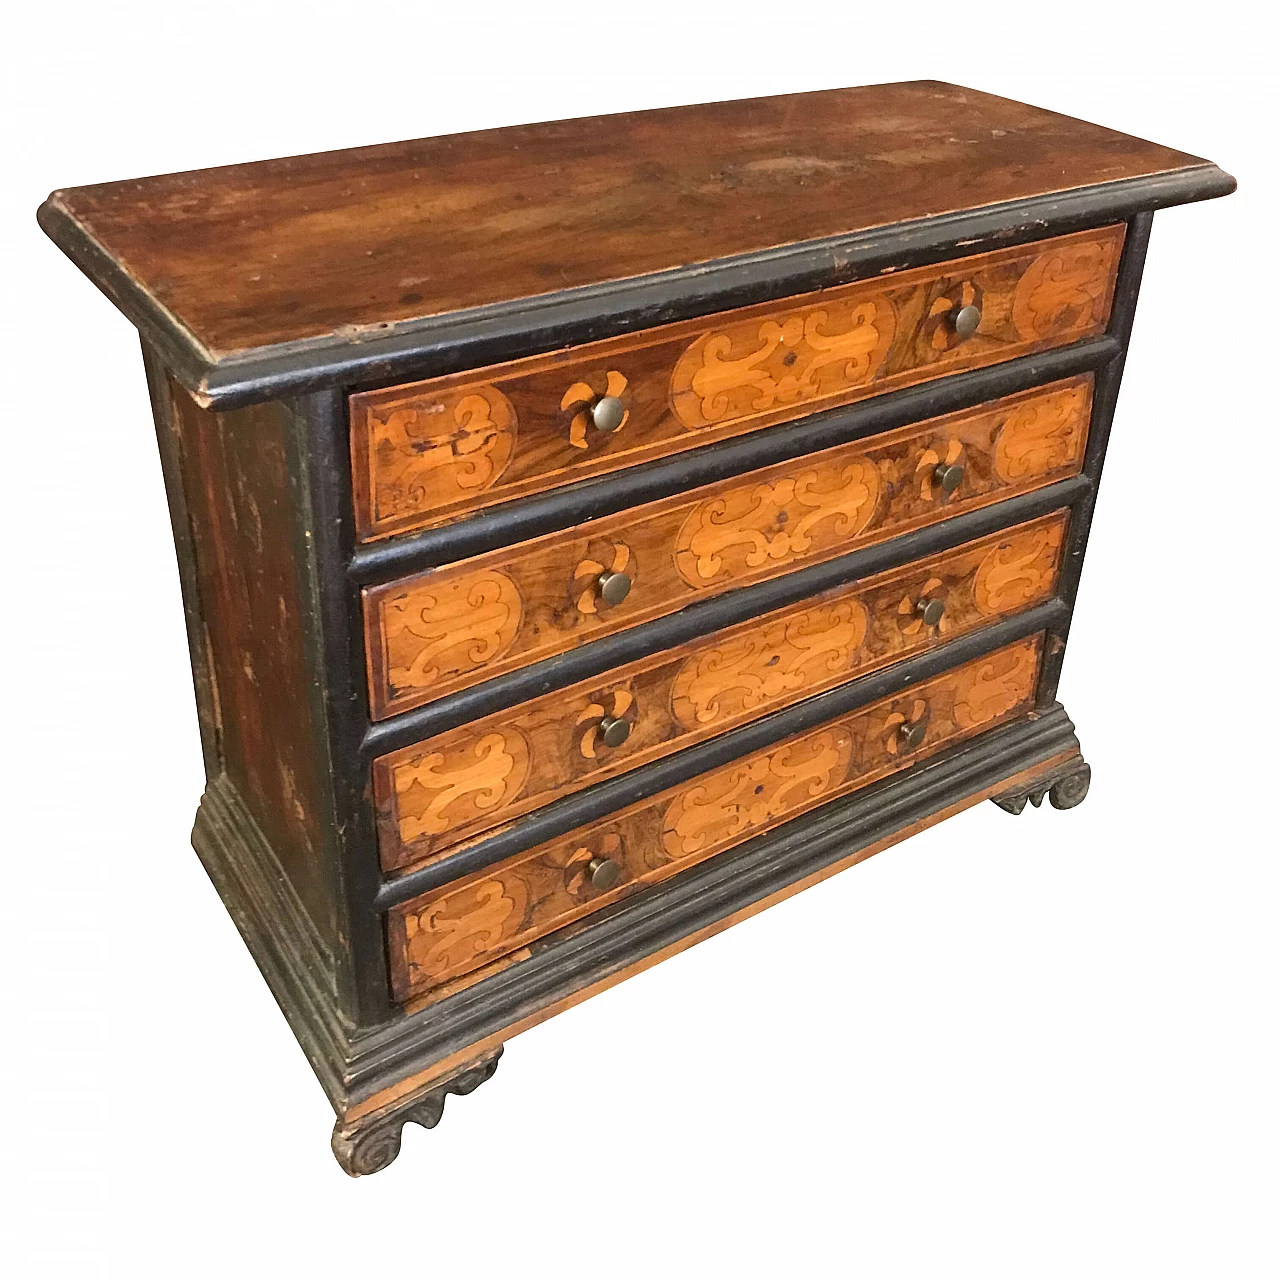 Lombard antique miniature dresser, prototype or model in inlaid walnut, original early 18th century 1185926